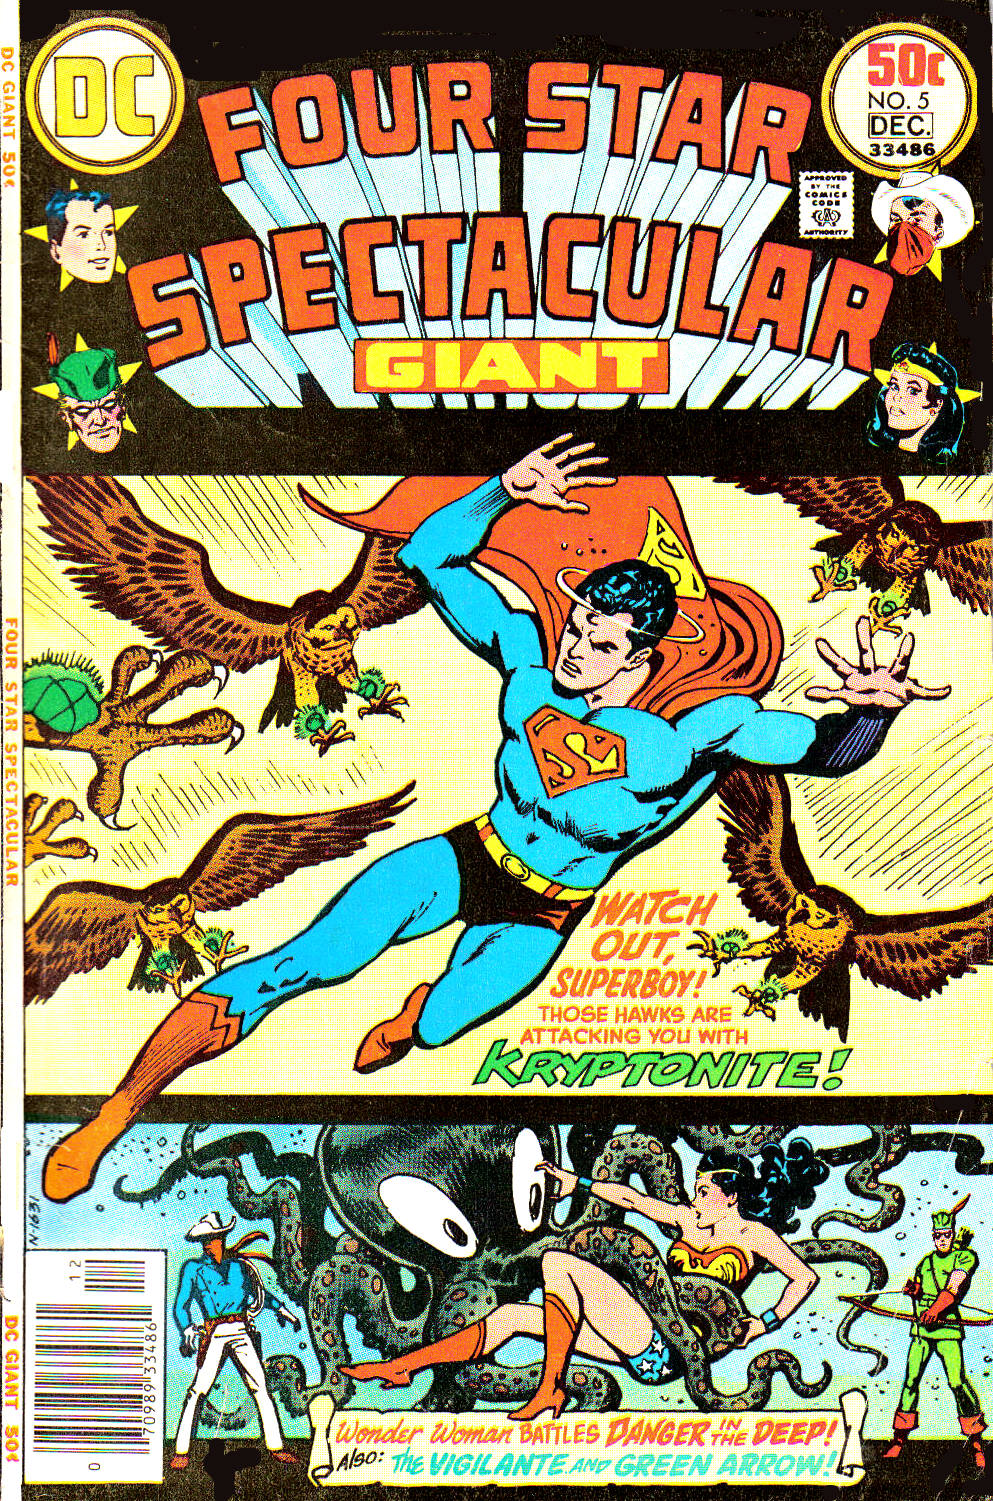 Read online Four Star Spectacular comic -  Issue #5 - 1